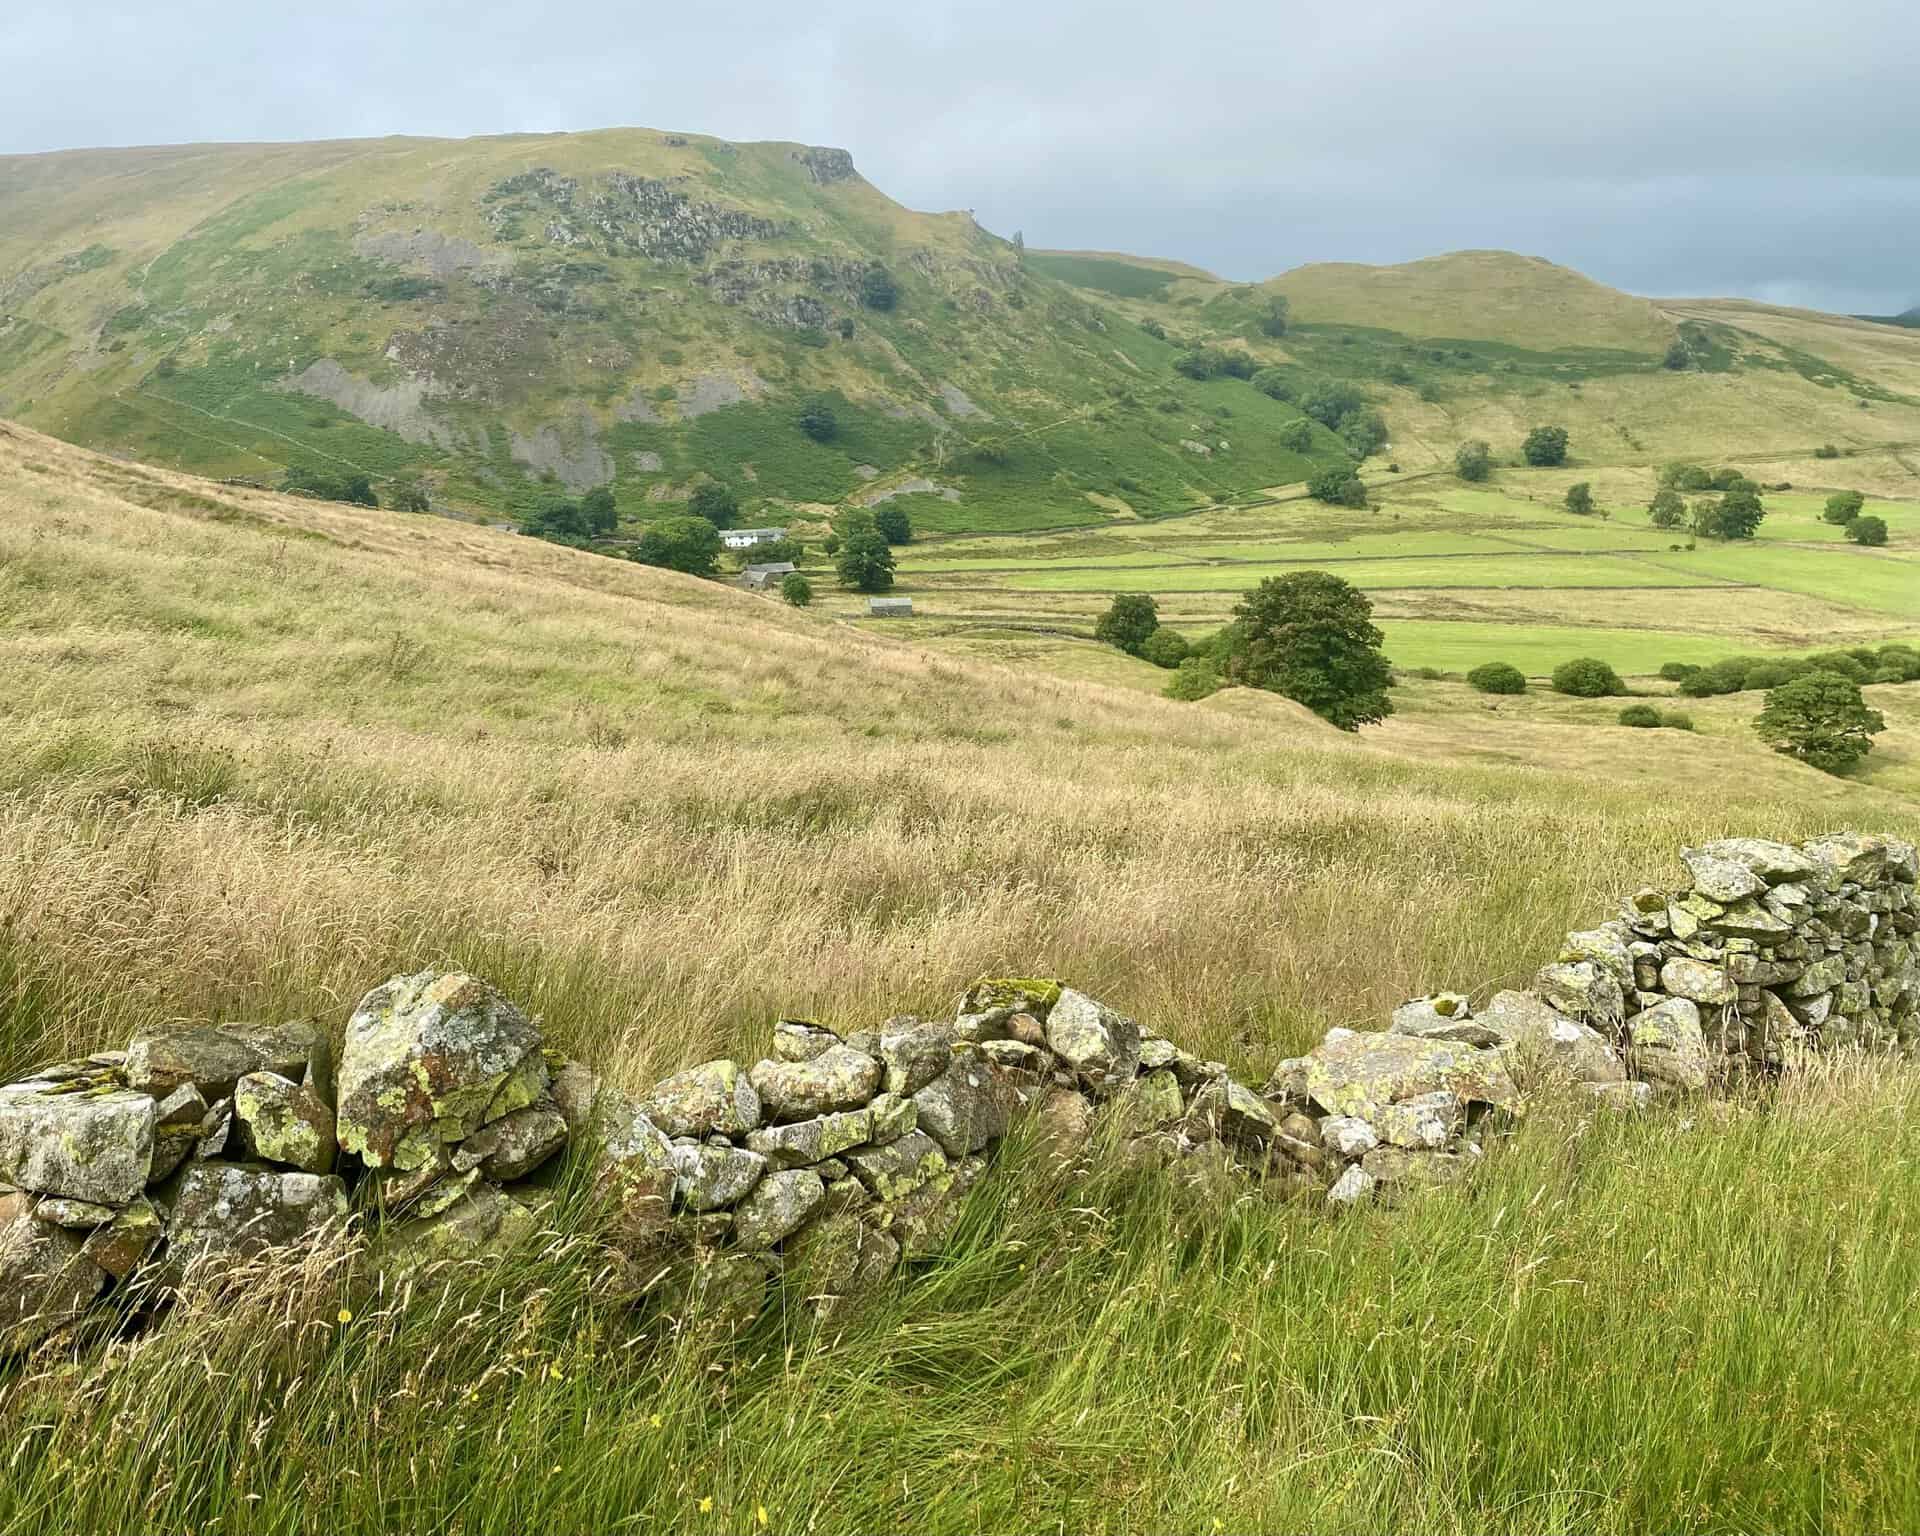 The hamlet of Dowthwaitehead can be seen nestled below Dowthwaite Crag on the south-eastern flanks of High Brow.